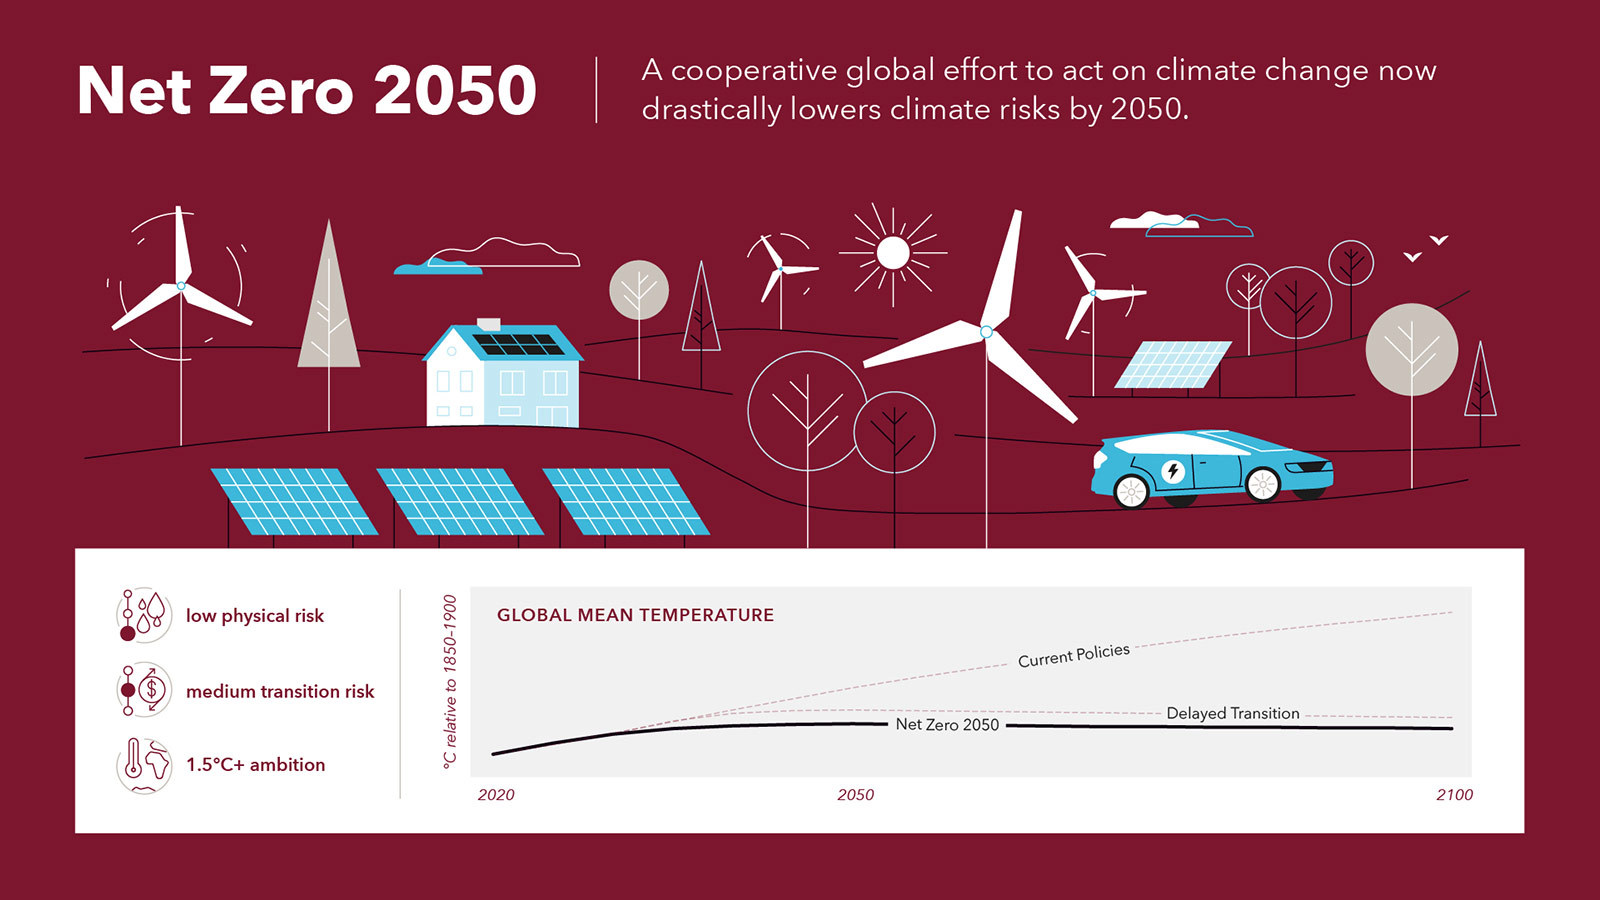 Scenario 2: Net Zero, A cooperative global effort to act on climate change now drastically lowers climate risks by 2050.